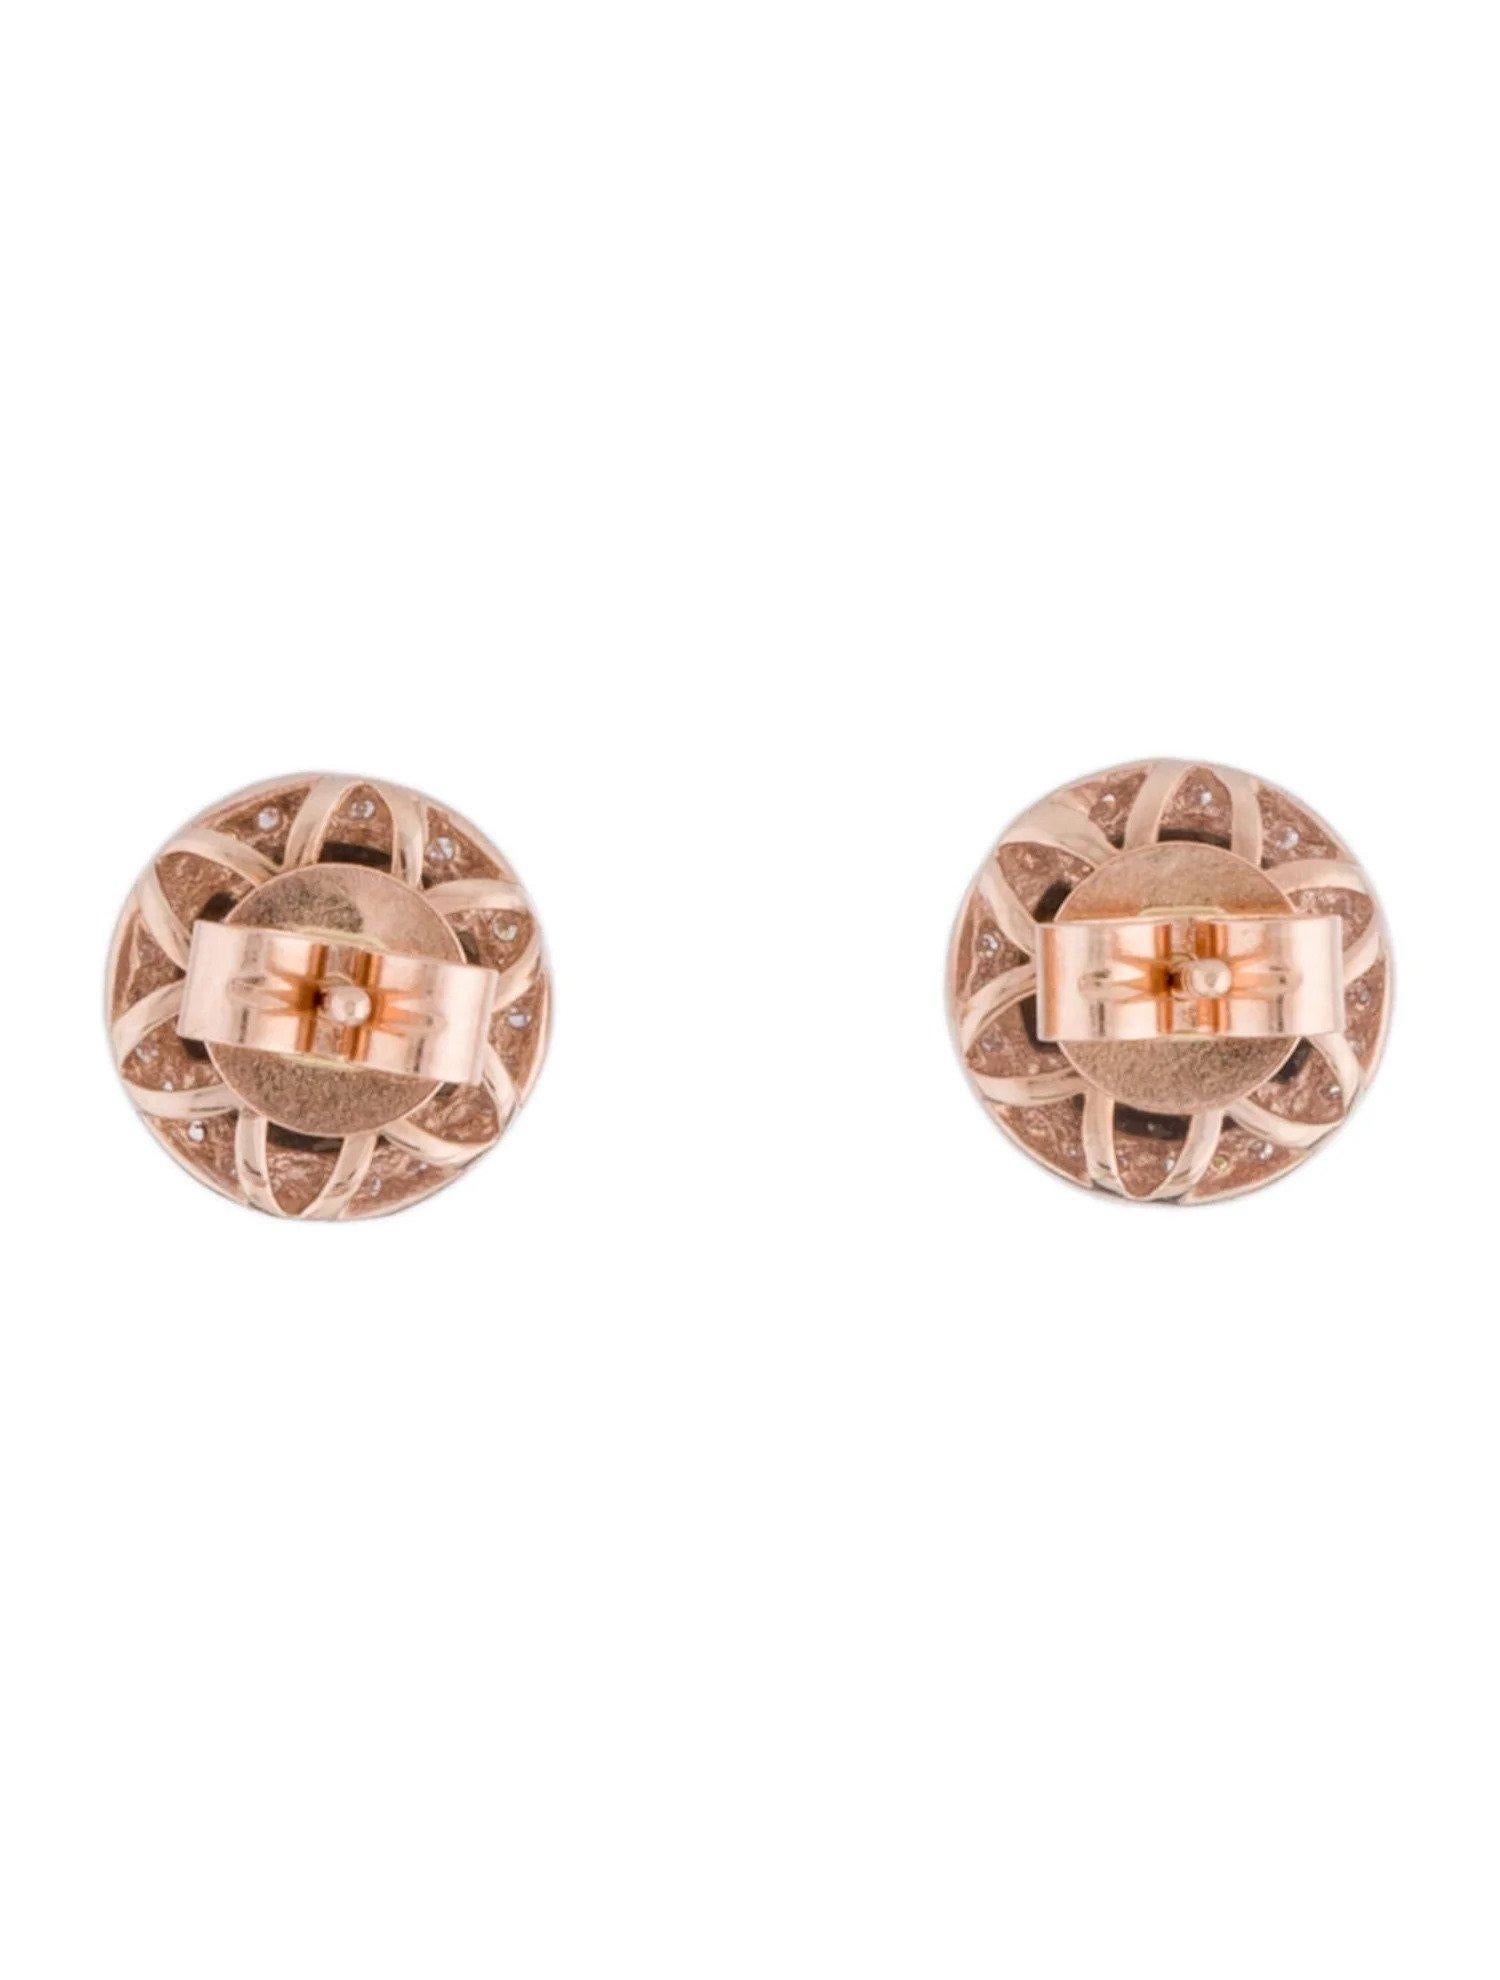 2.27 Carat Round Smokey Quartz & Diamond Rose Gold Stud Earrings  In New Condition For Sale In Great Neck, NY